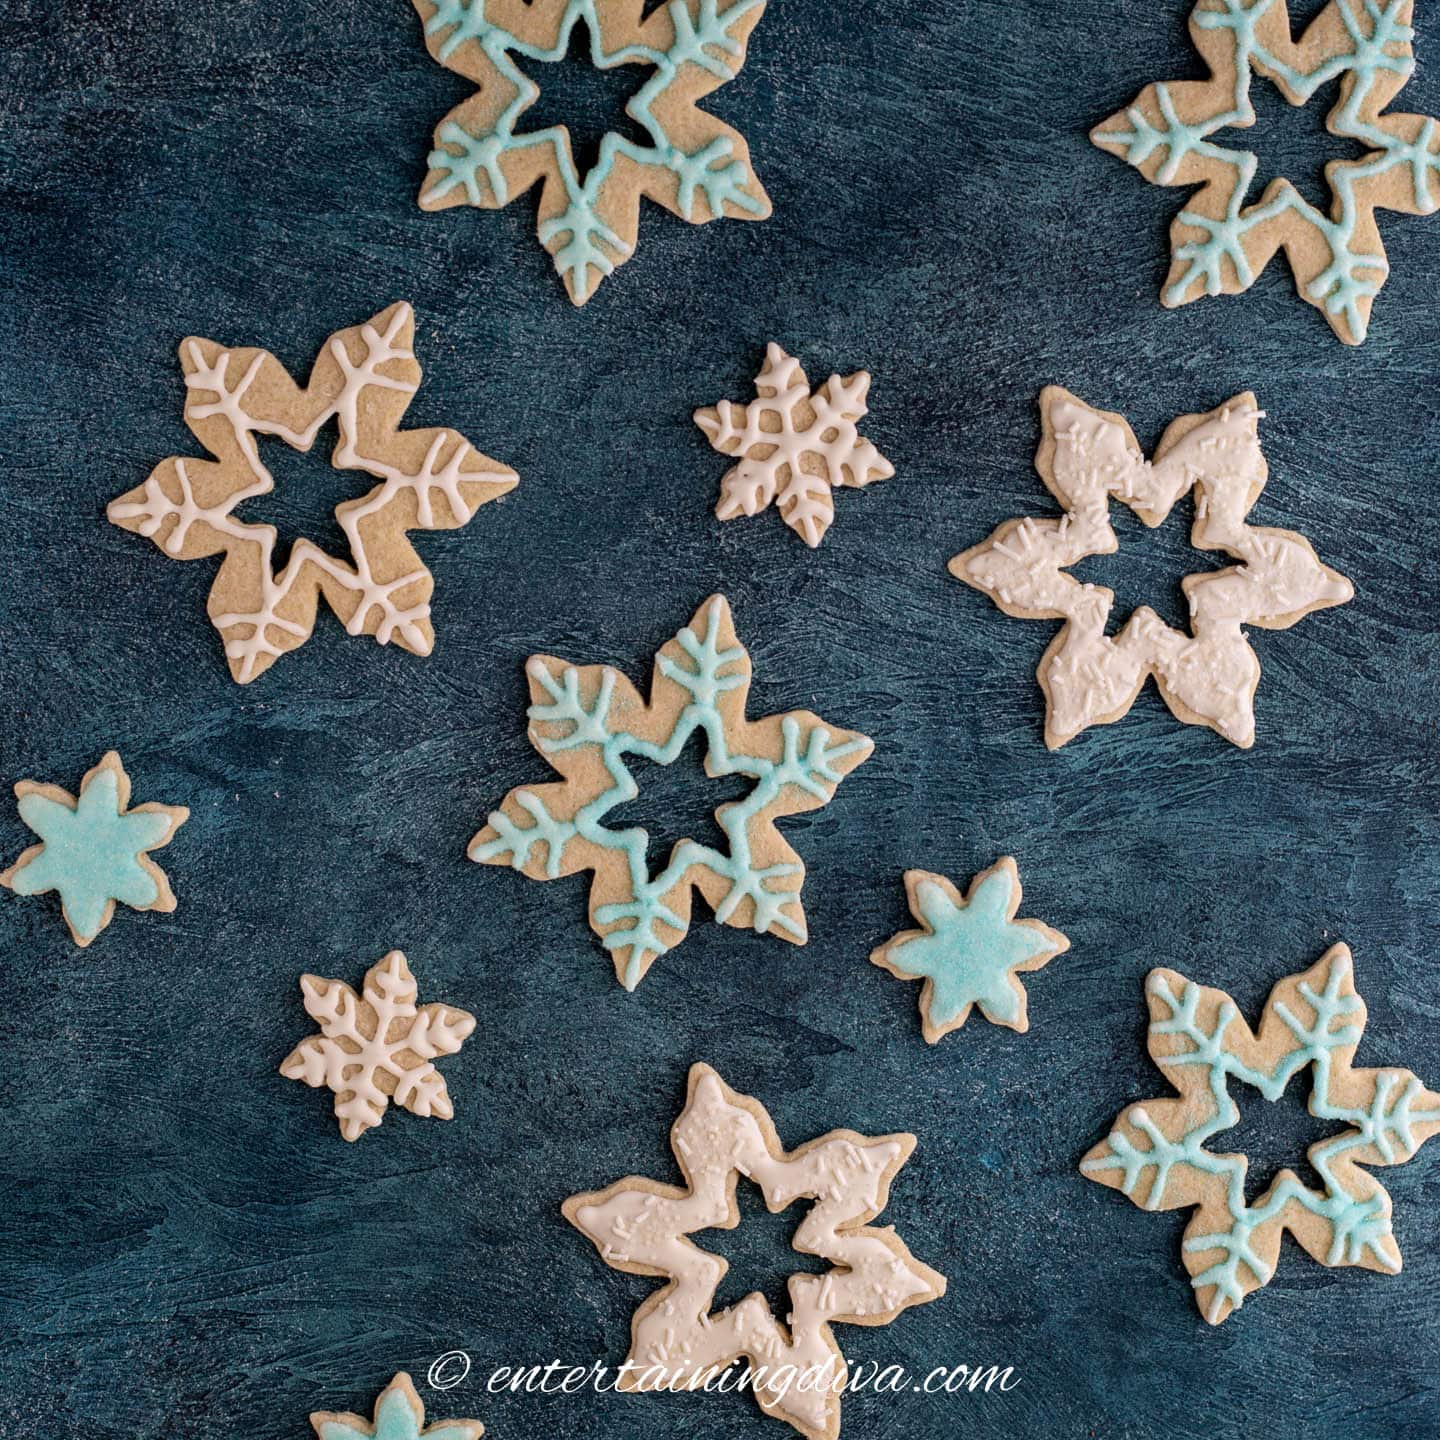 snowflake sugar cookie decorating ideas with royal icing